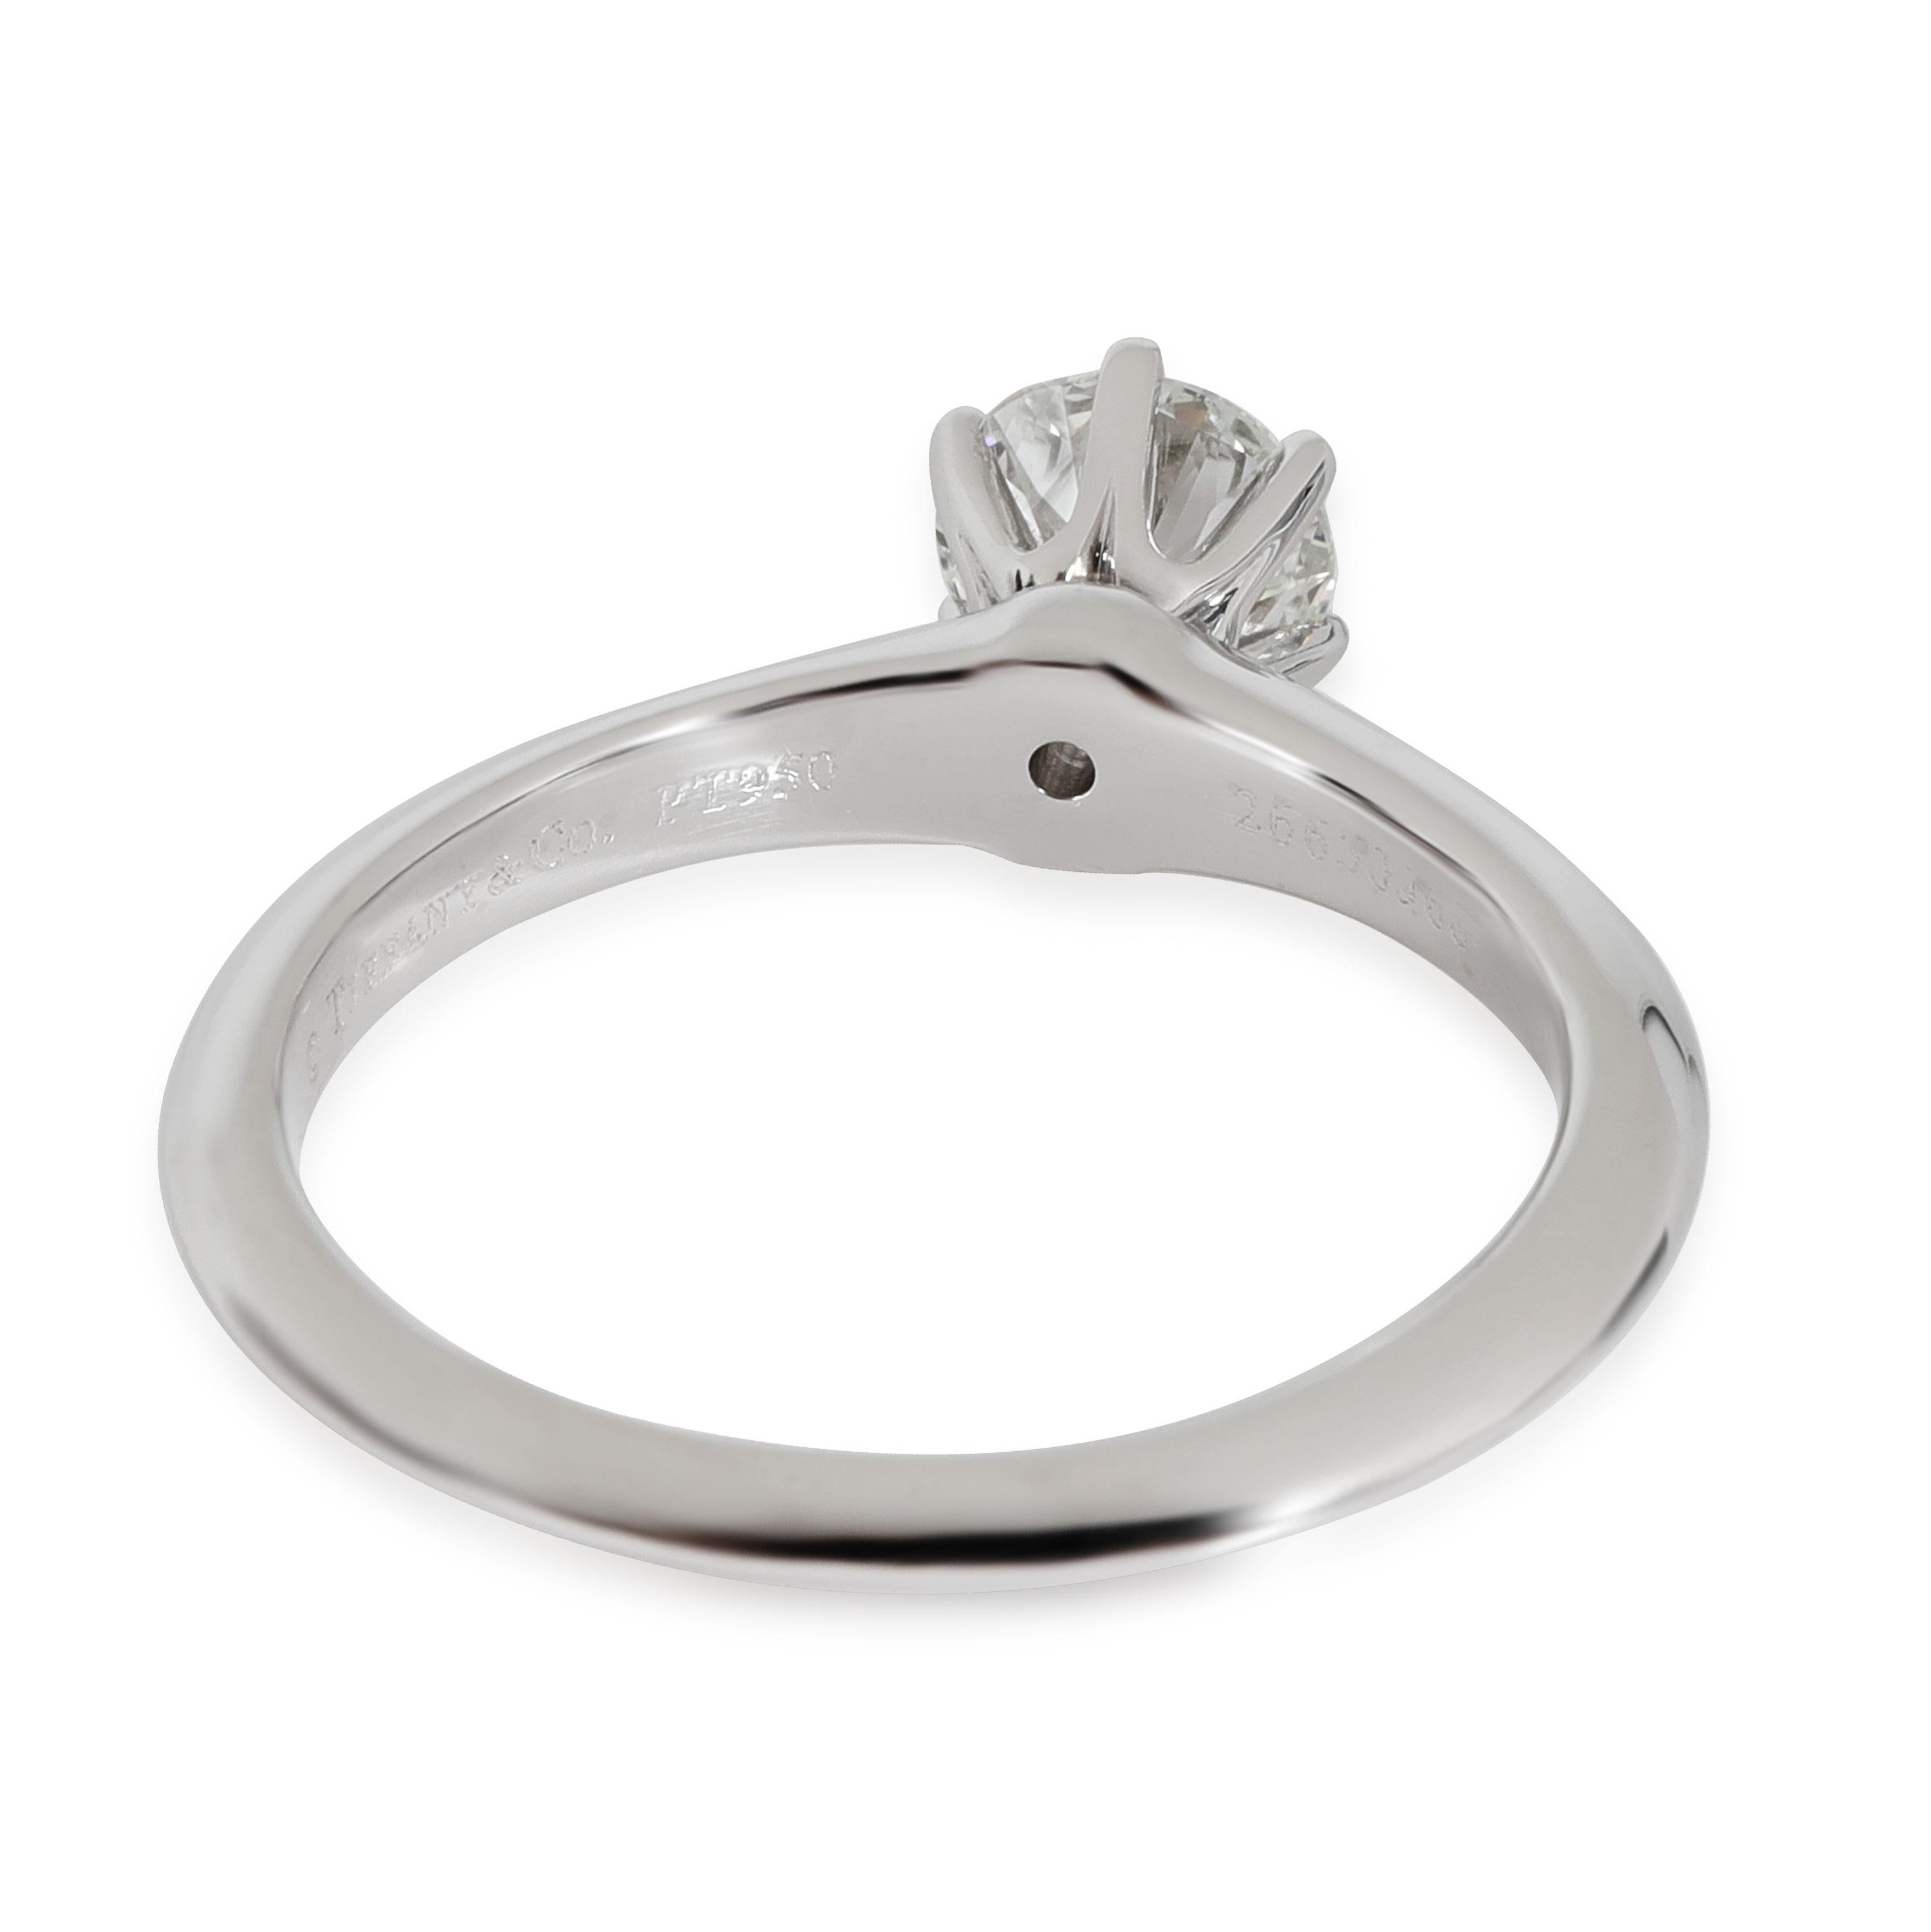 Tiffany & Co. Diamond Engagement Ring in Platinum H VS1 0.90 CTW

PRIMARY DETAILS
SKU: 115813
Listing Title: Tiffany & Co. Diamond Engagement Ring in Platinum H VS1 0.90 CTW
Condition Description: Retails for 12250 USD. In excellent condition and